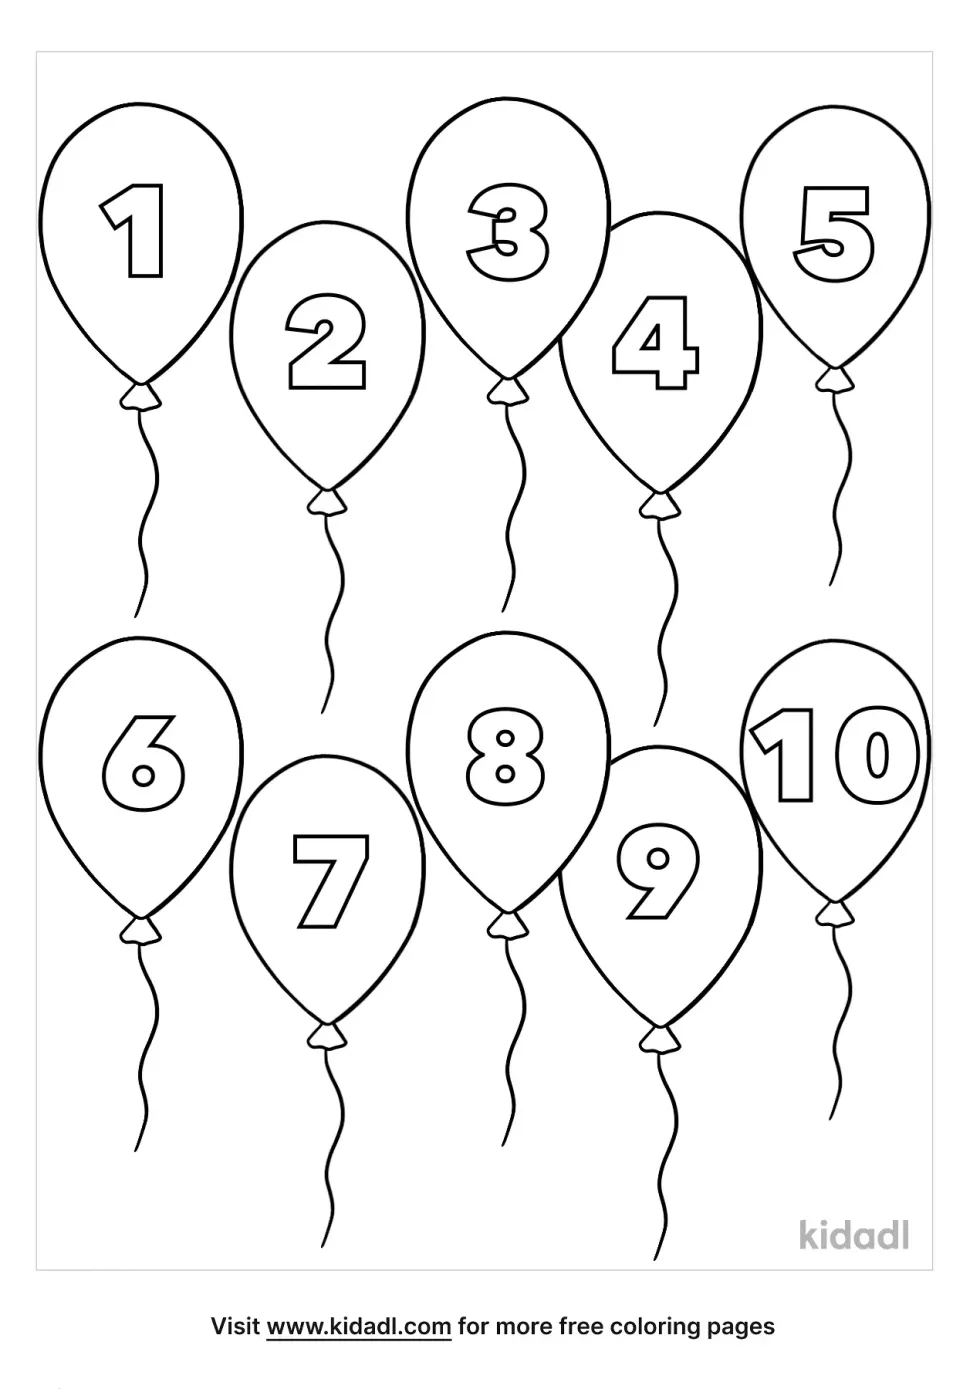 Balloons With Numbers